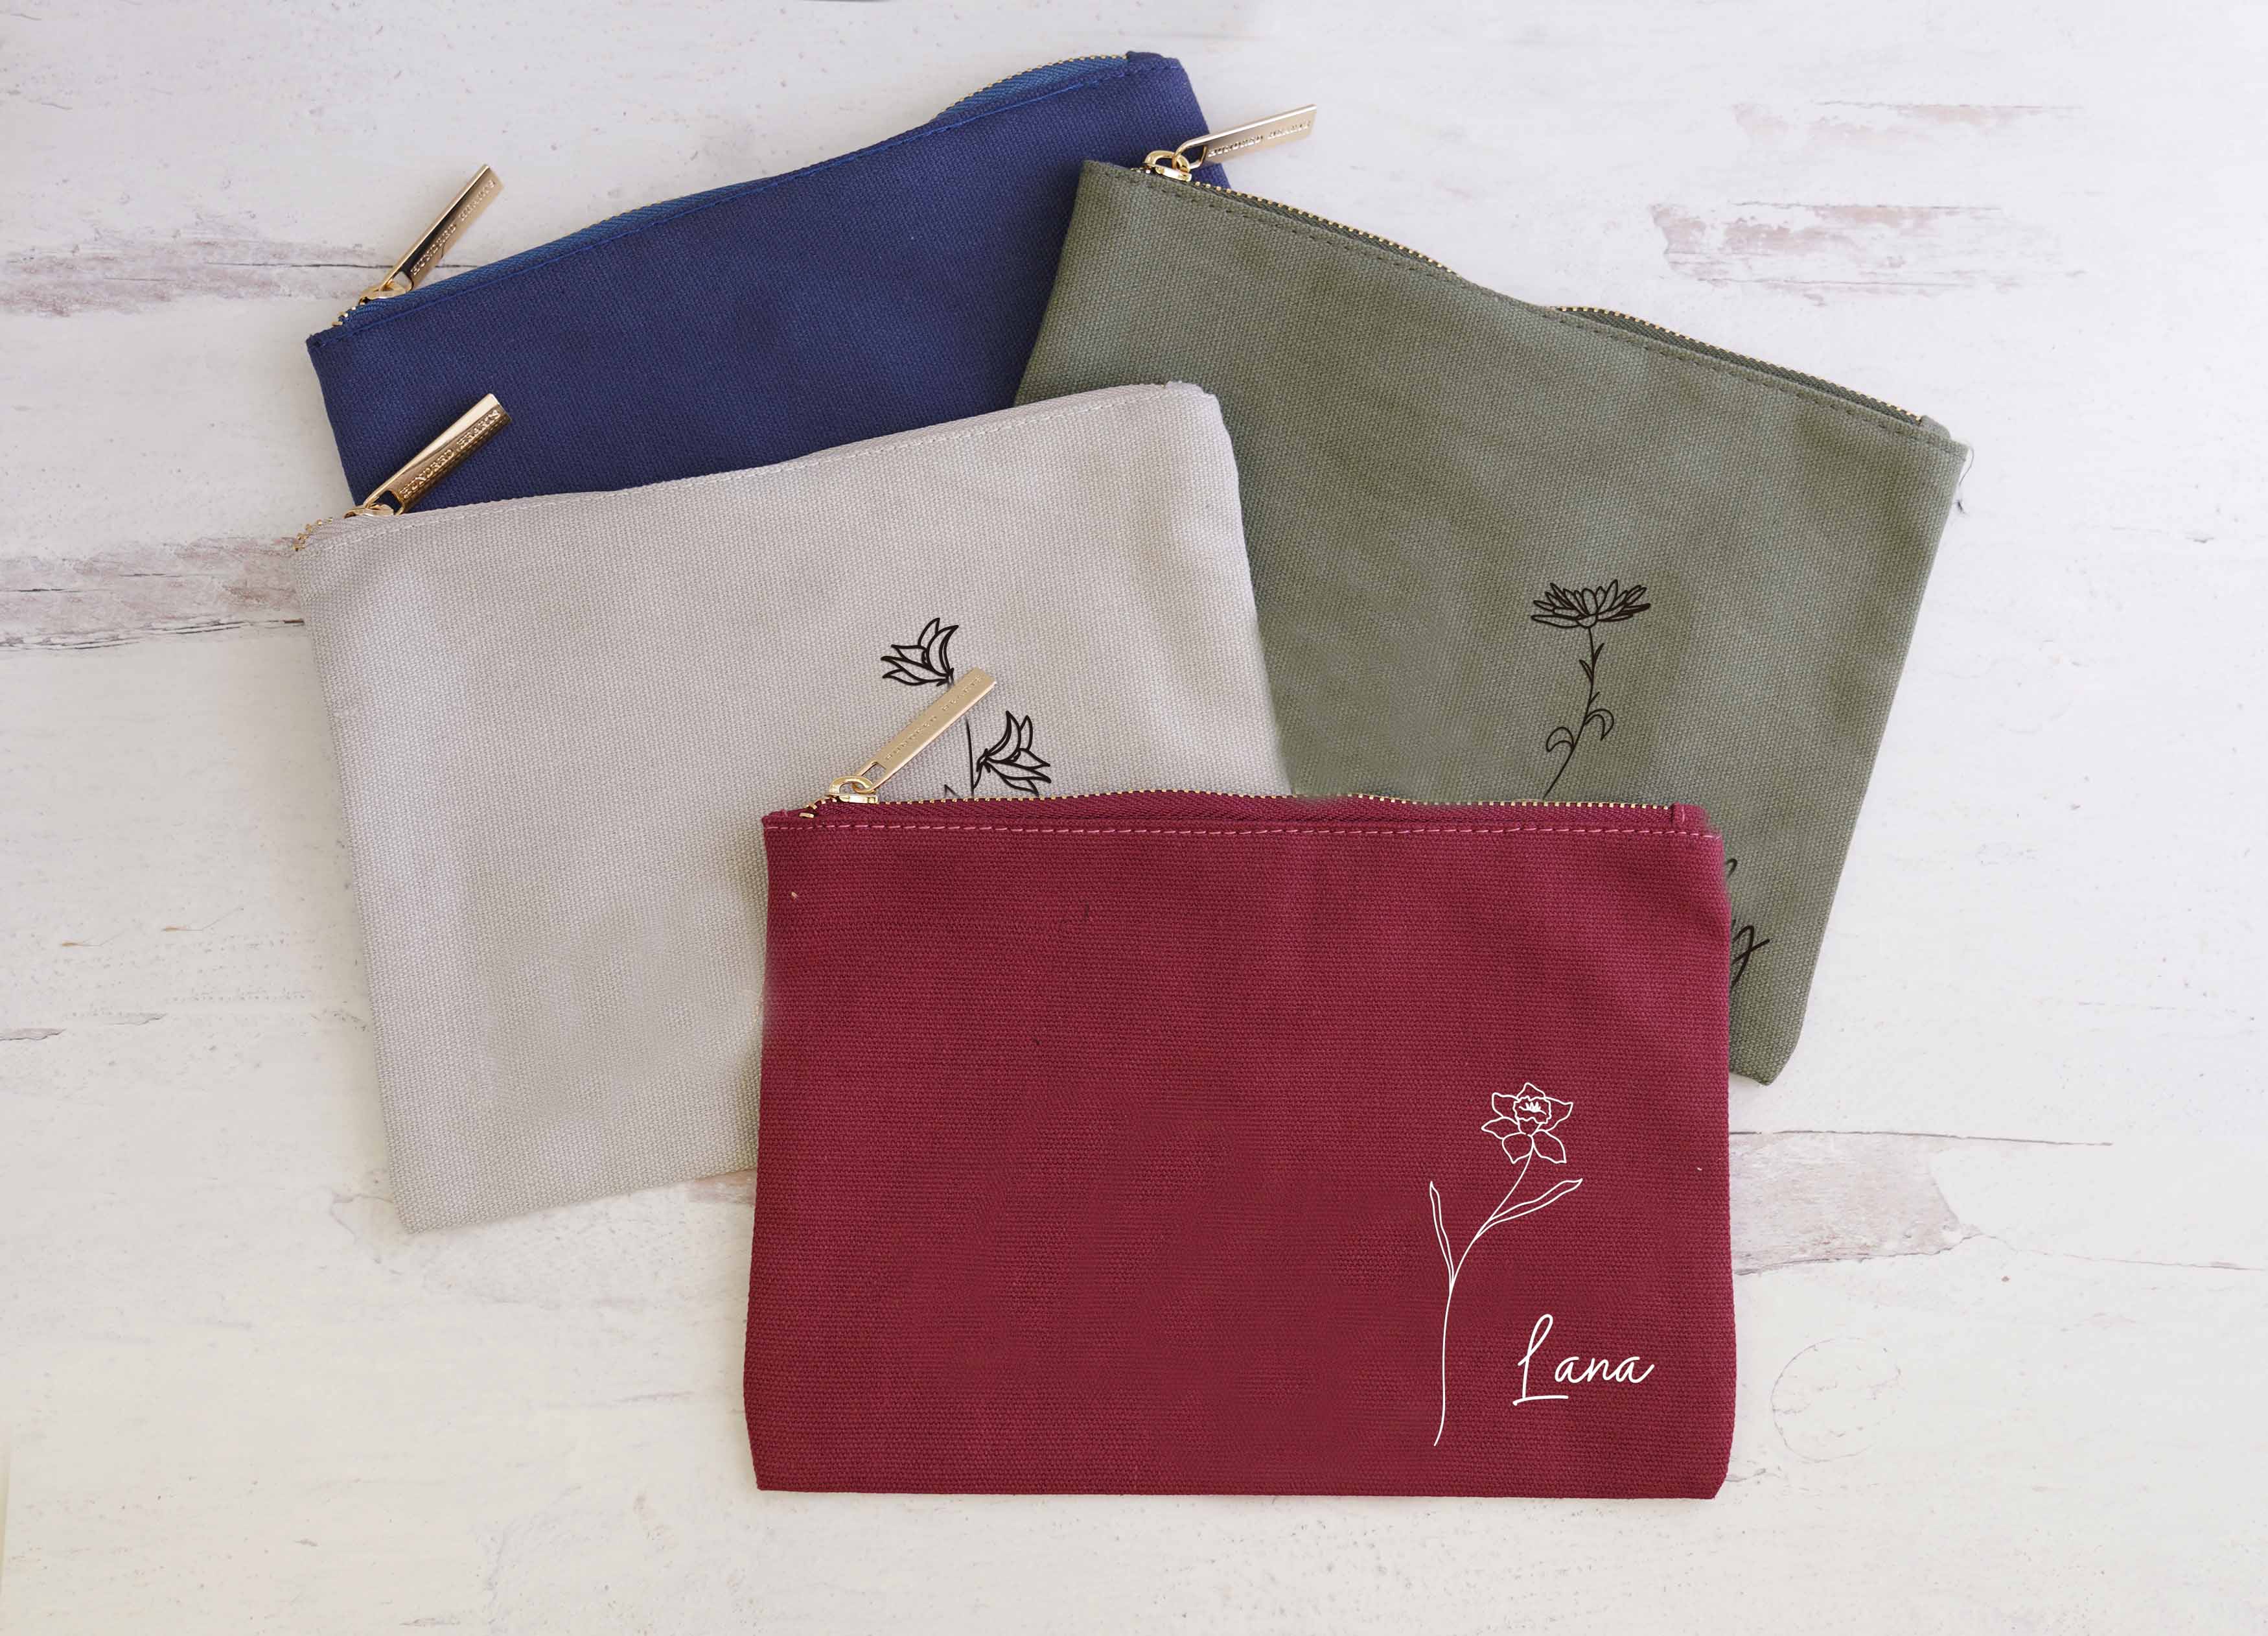 Cranberry, Grey, Sage and midnight blue Personalized Cosmetic Bags with birth flower image and name.